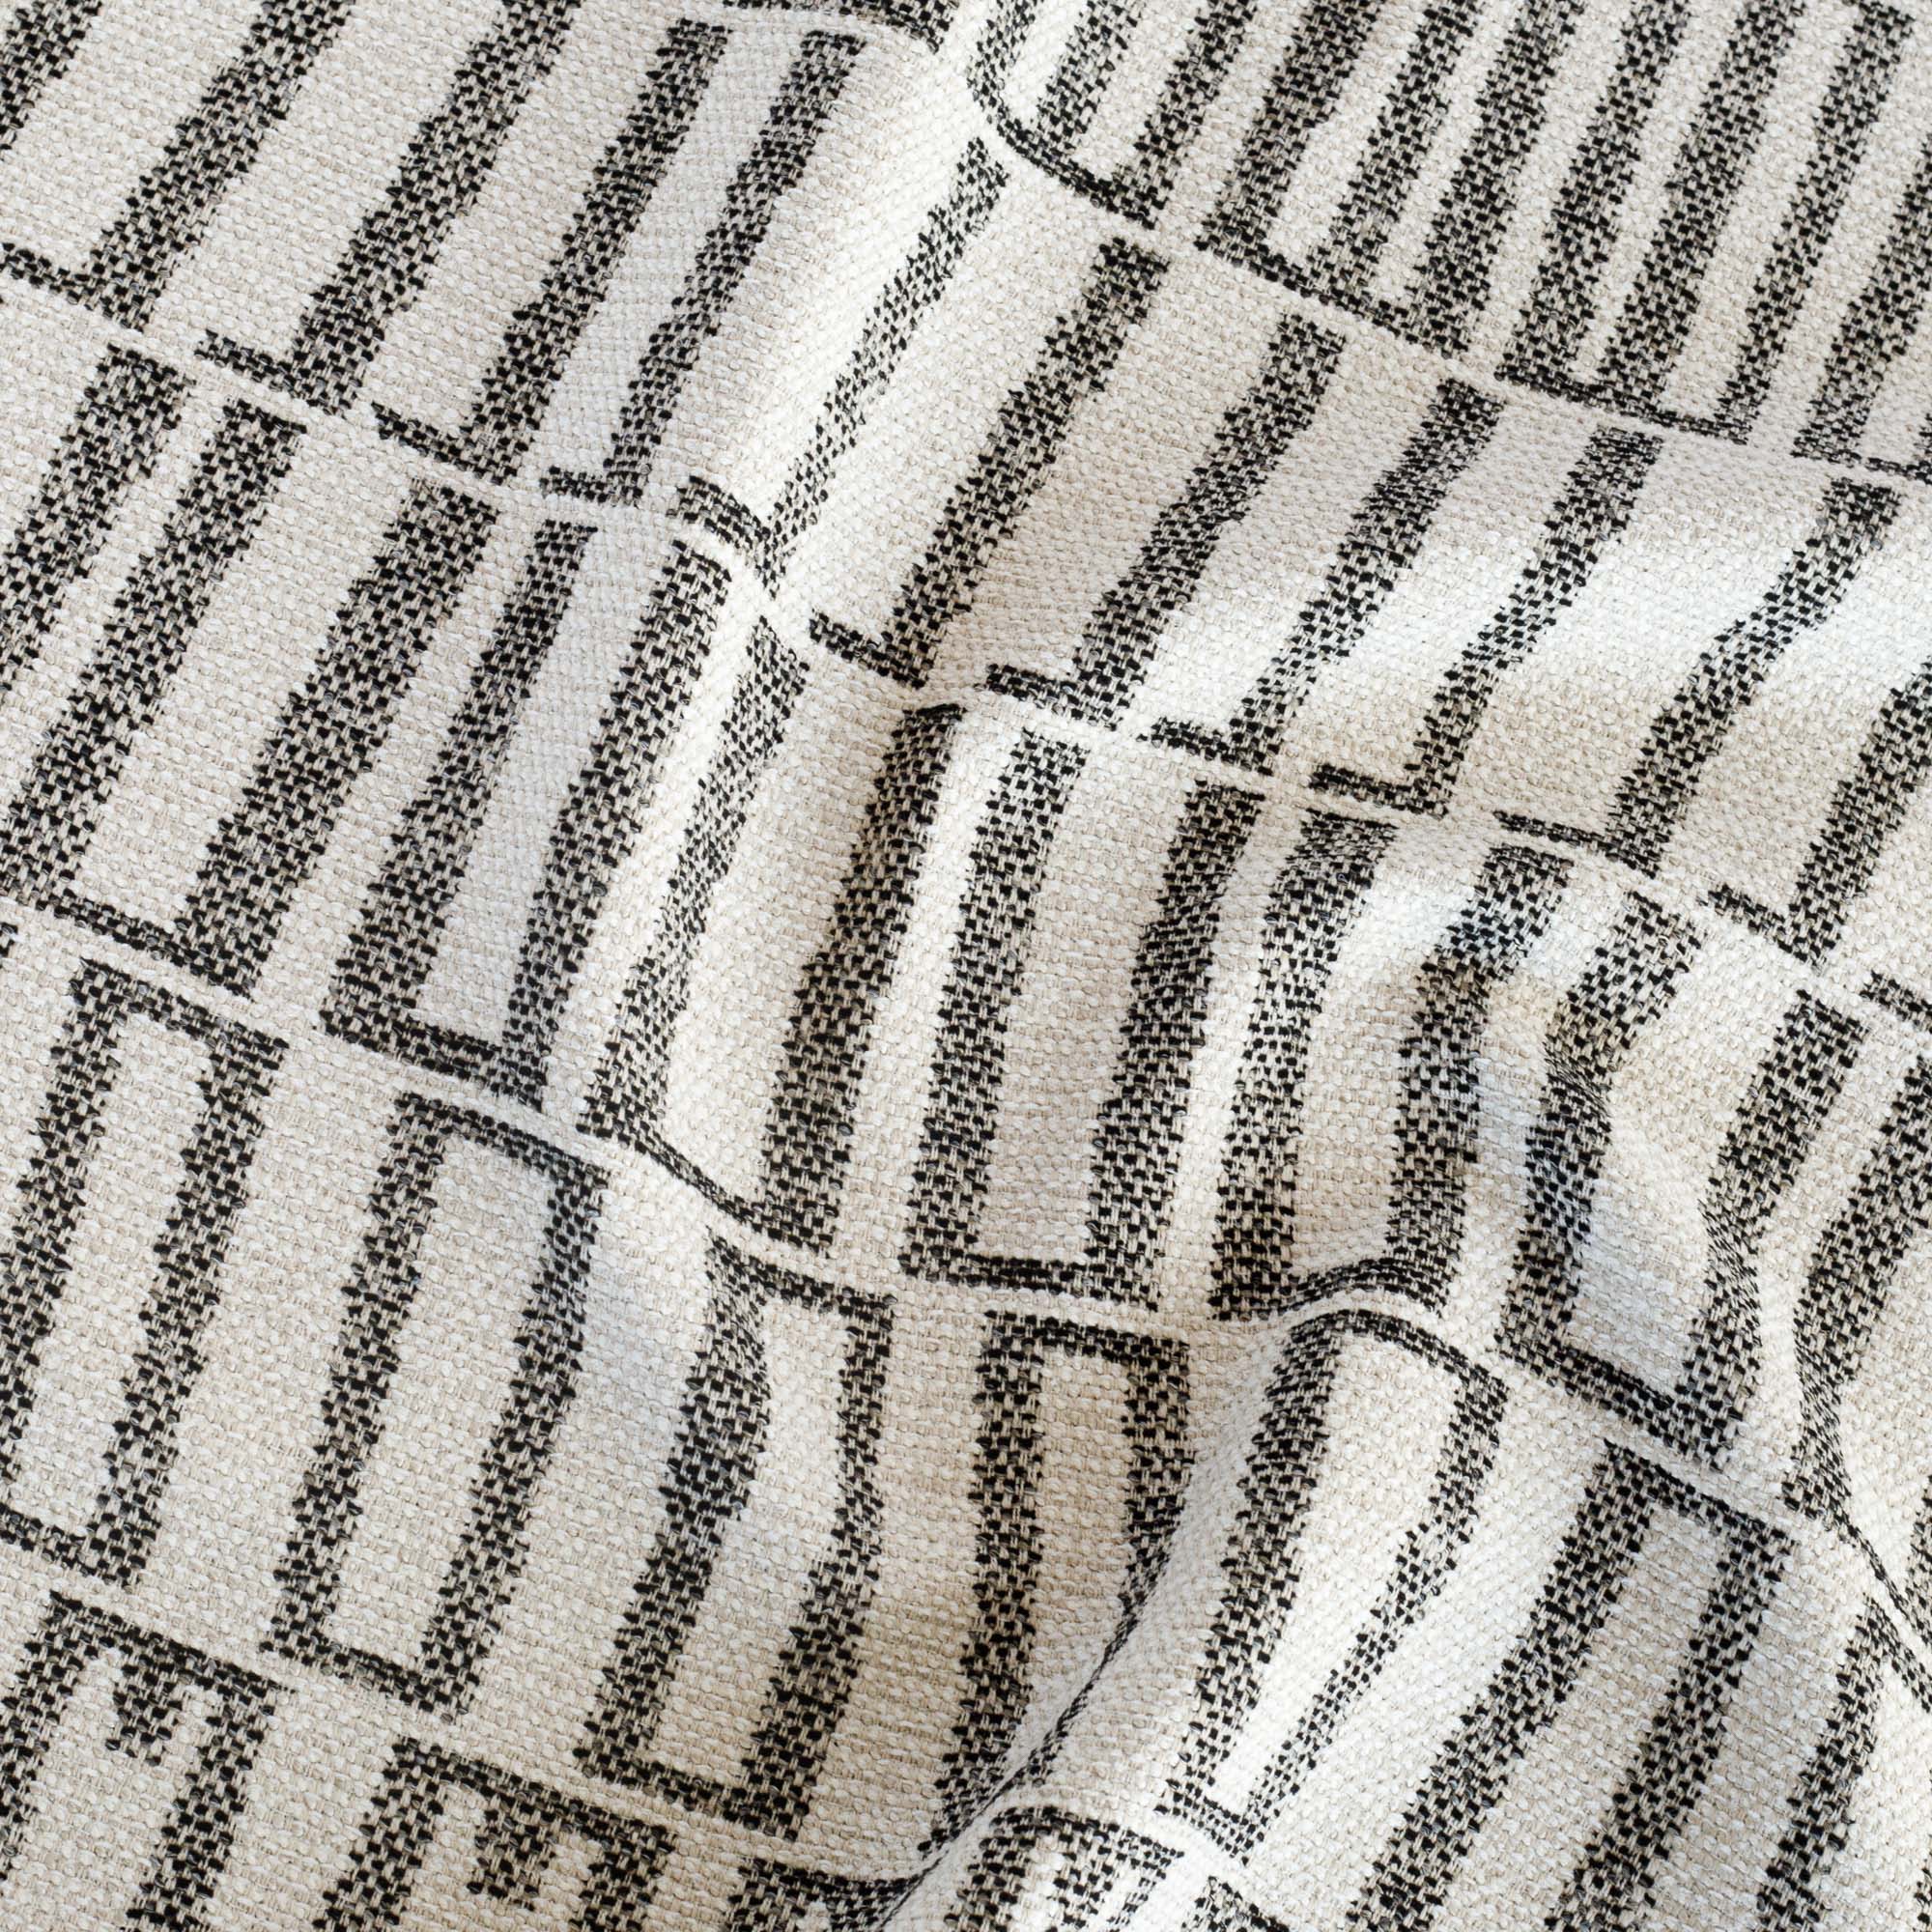 a black and sand beige abstract geometric patterned outdoor fabric from Tonic Living